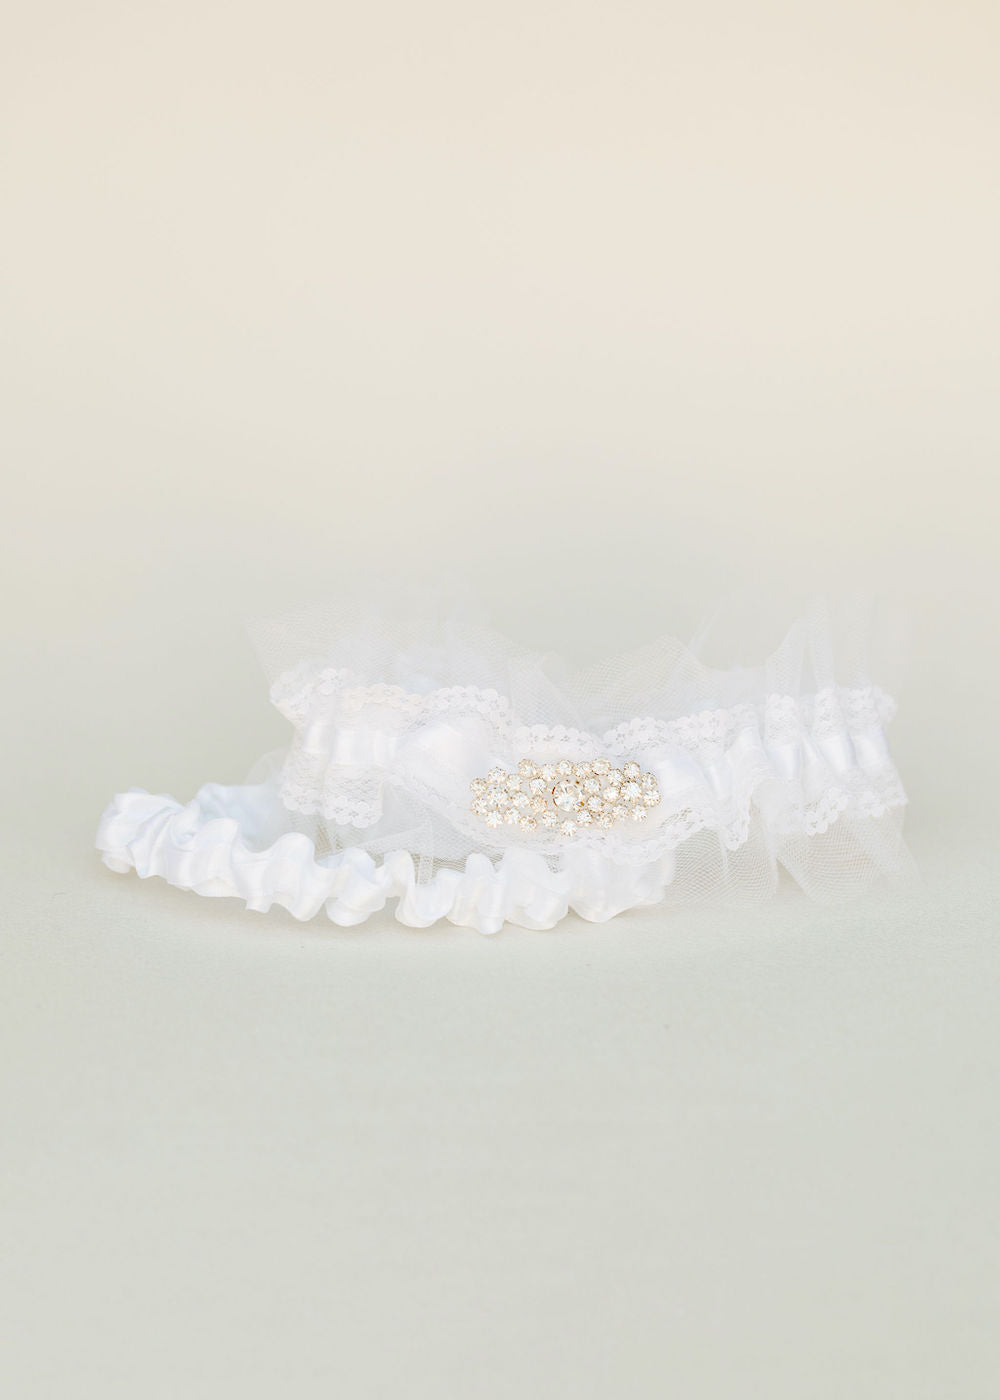 custom wedding garter set with white tulle, sparkle detail, personalized with embroidery by The Garter Girl 